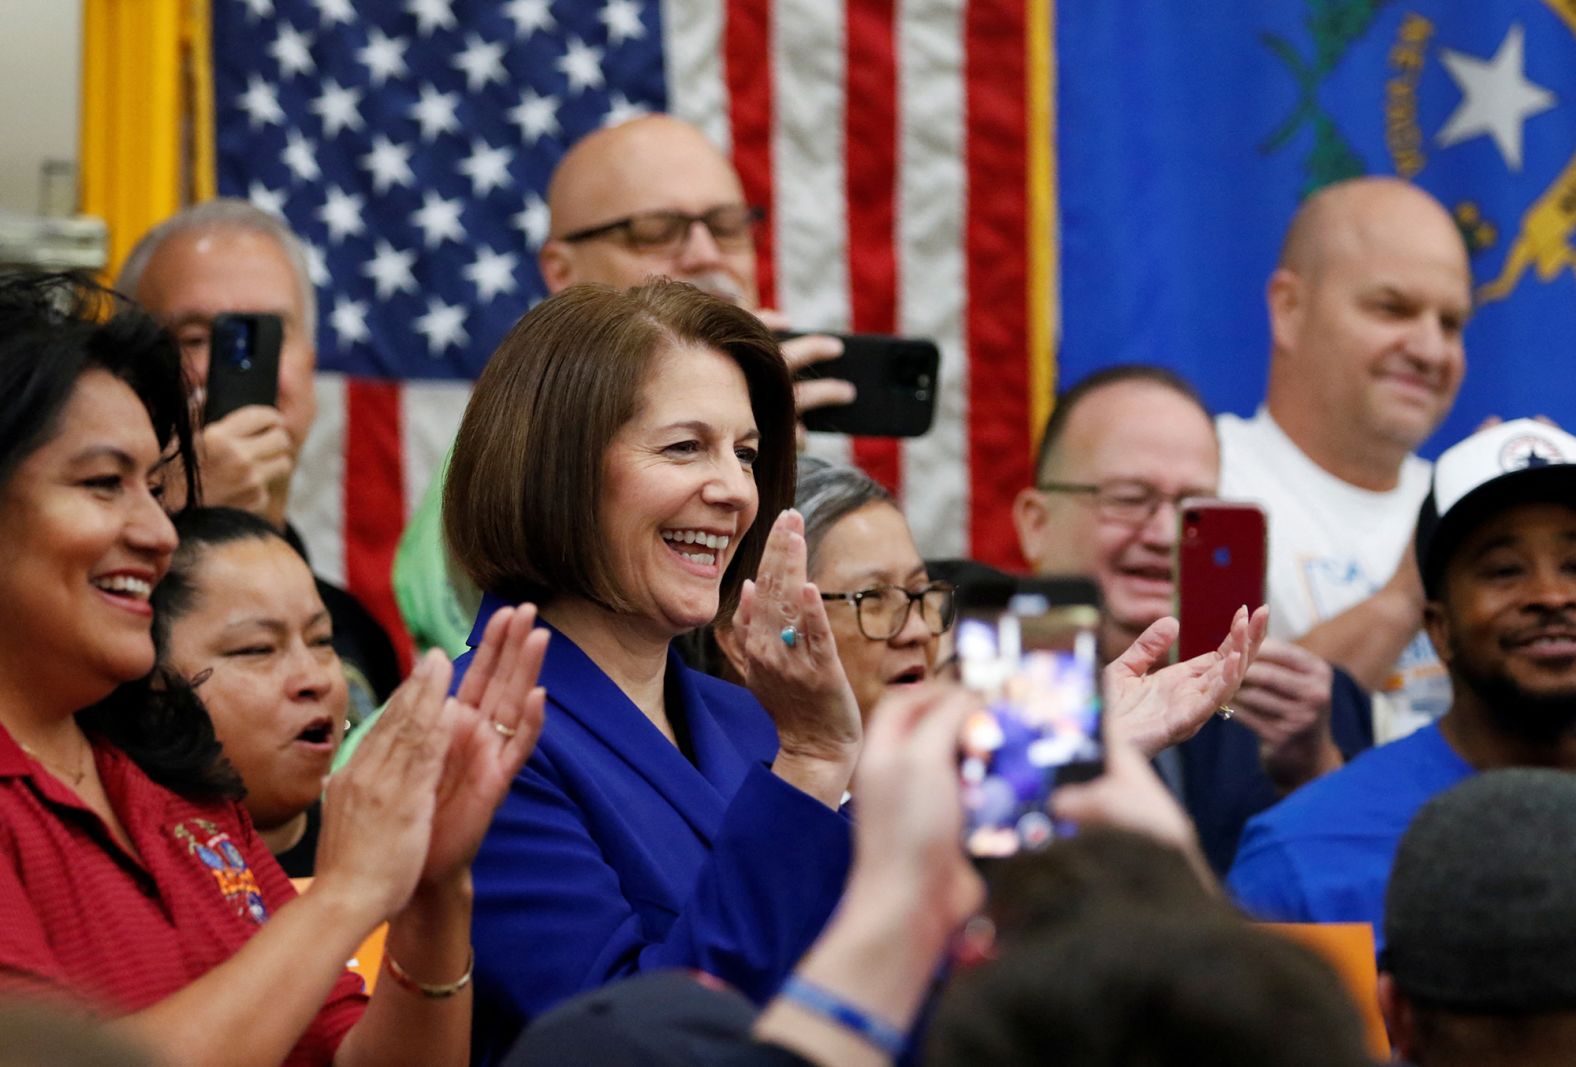 US Sen. Catherine Cortez Masto, surrounded by supporters from local unions, celebrates her reelection at a news conference in Las Vegas on November 13. <a href="index.php?page=&url=https%3A%2F%2Fwww.cnn.com%2F2022%2F11%2F12%2Fpolitics%2Fcatherine-cortez-masto-nevada-senate" target="_blank">Her projected win</a> meant that the Democratic Party would maintain control of the Senate.